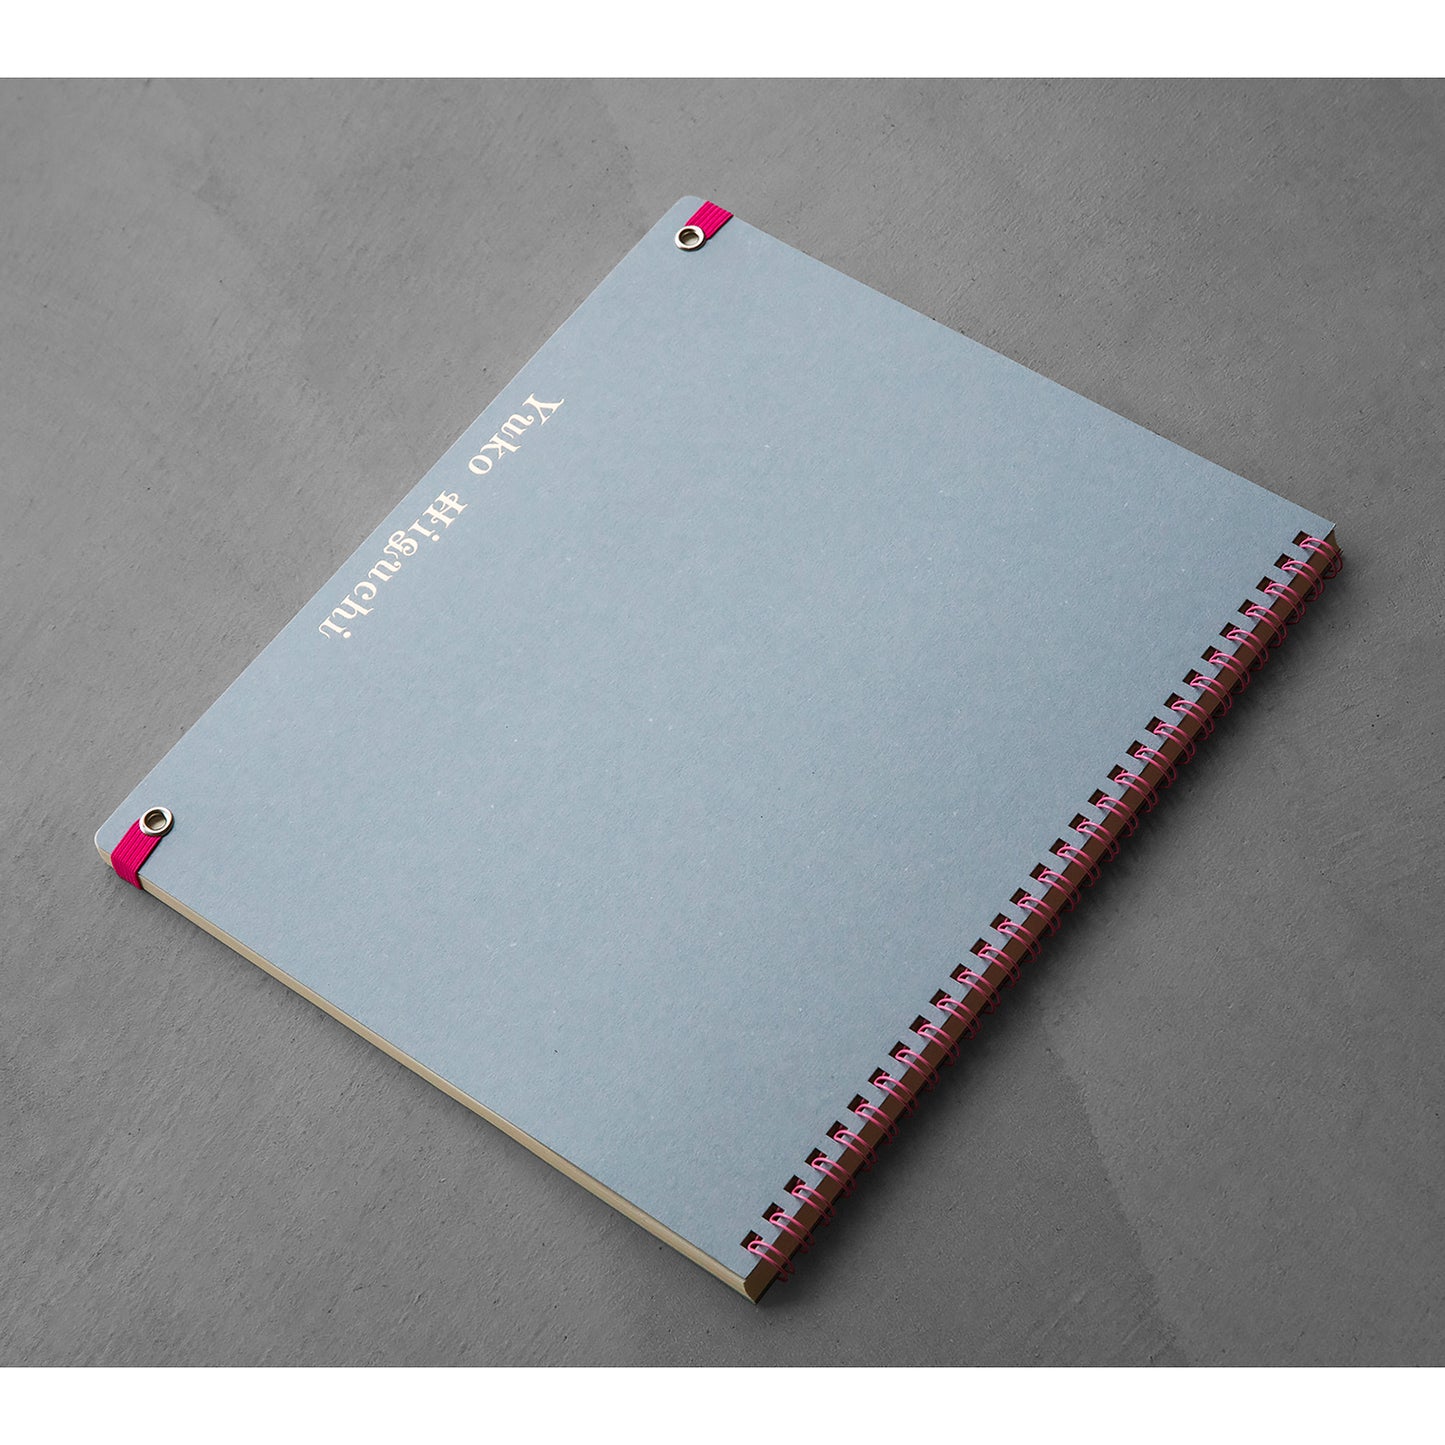 Whole surface foil stamped Ring Notebook Seal Zukan